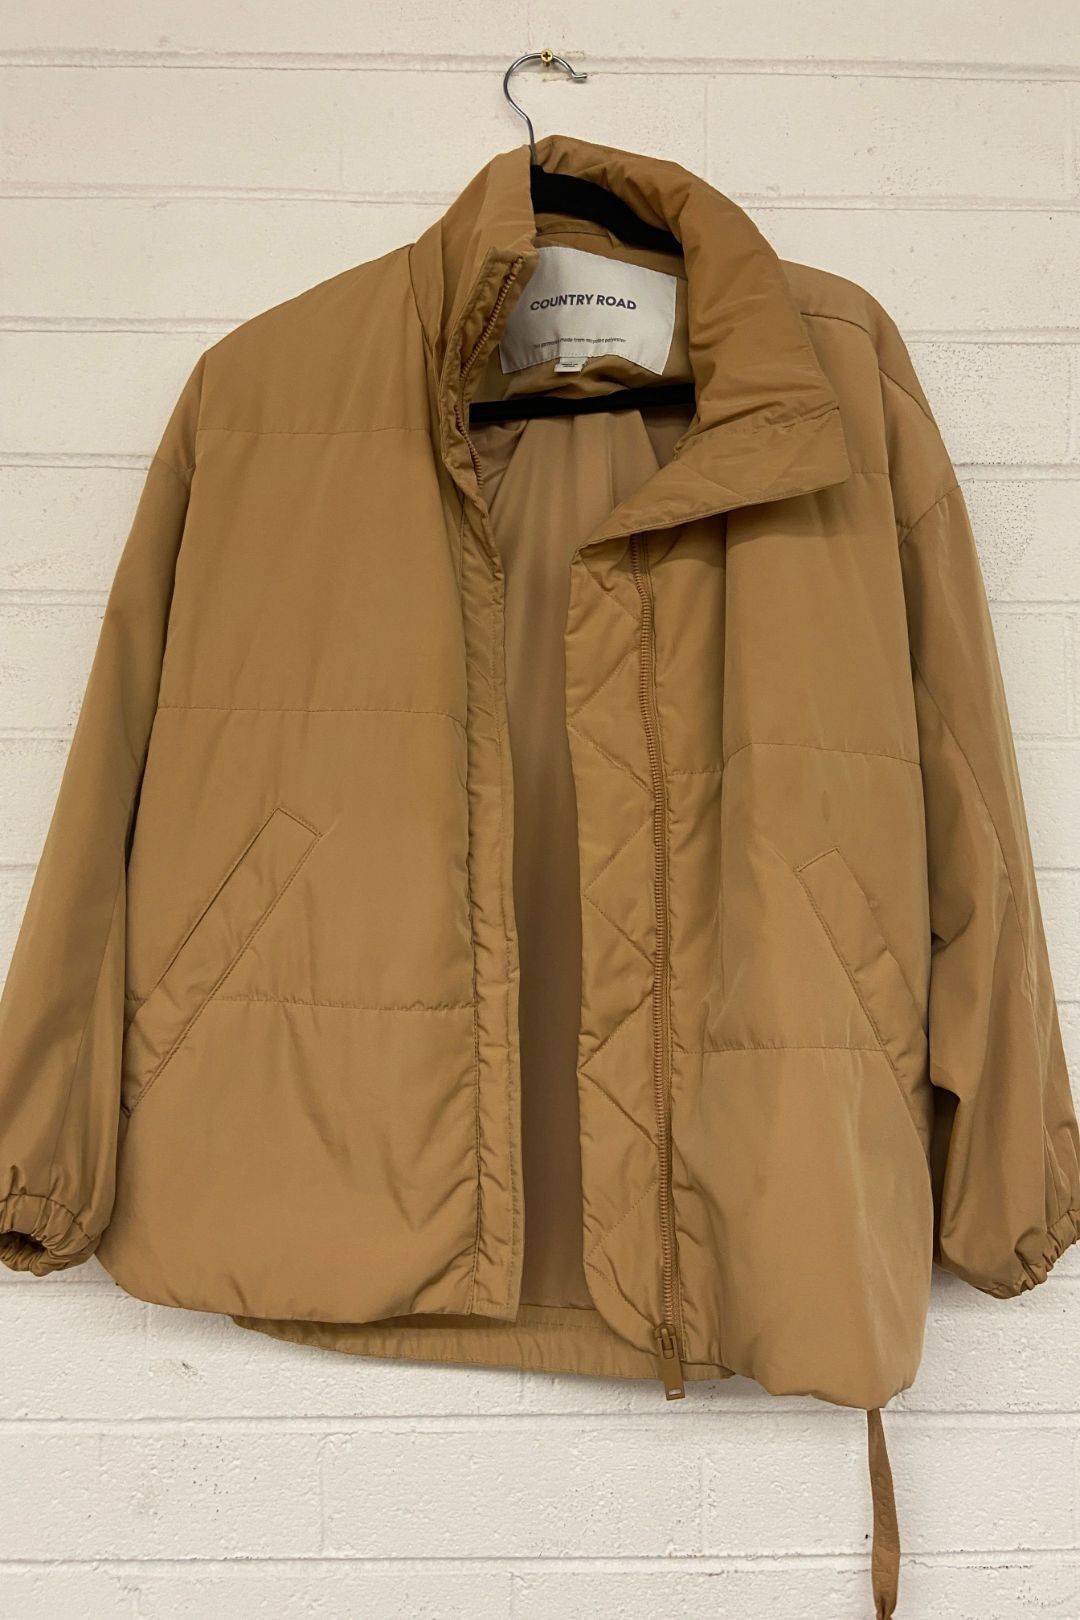 Country Road Lightweight Puffer Jacket in Brown